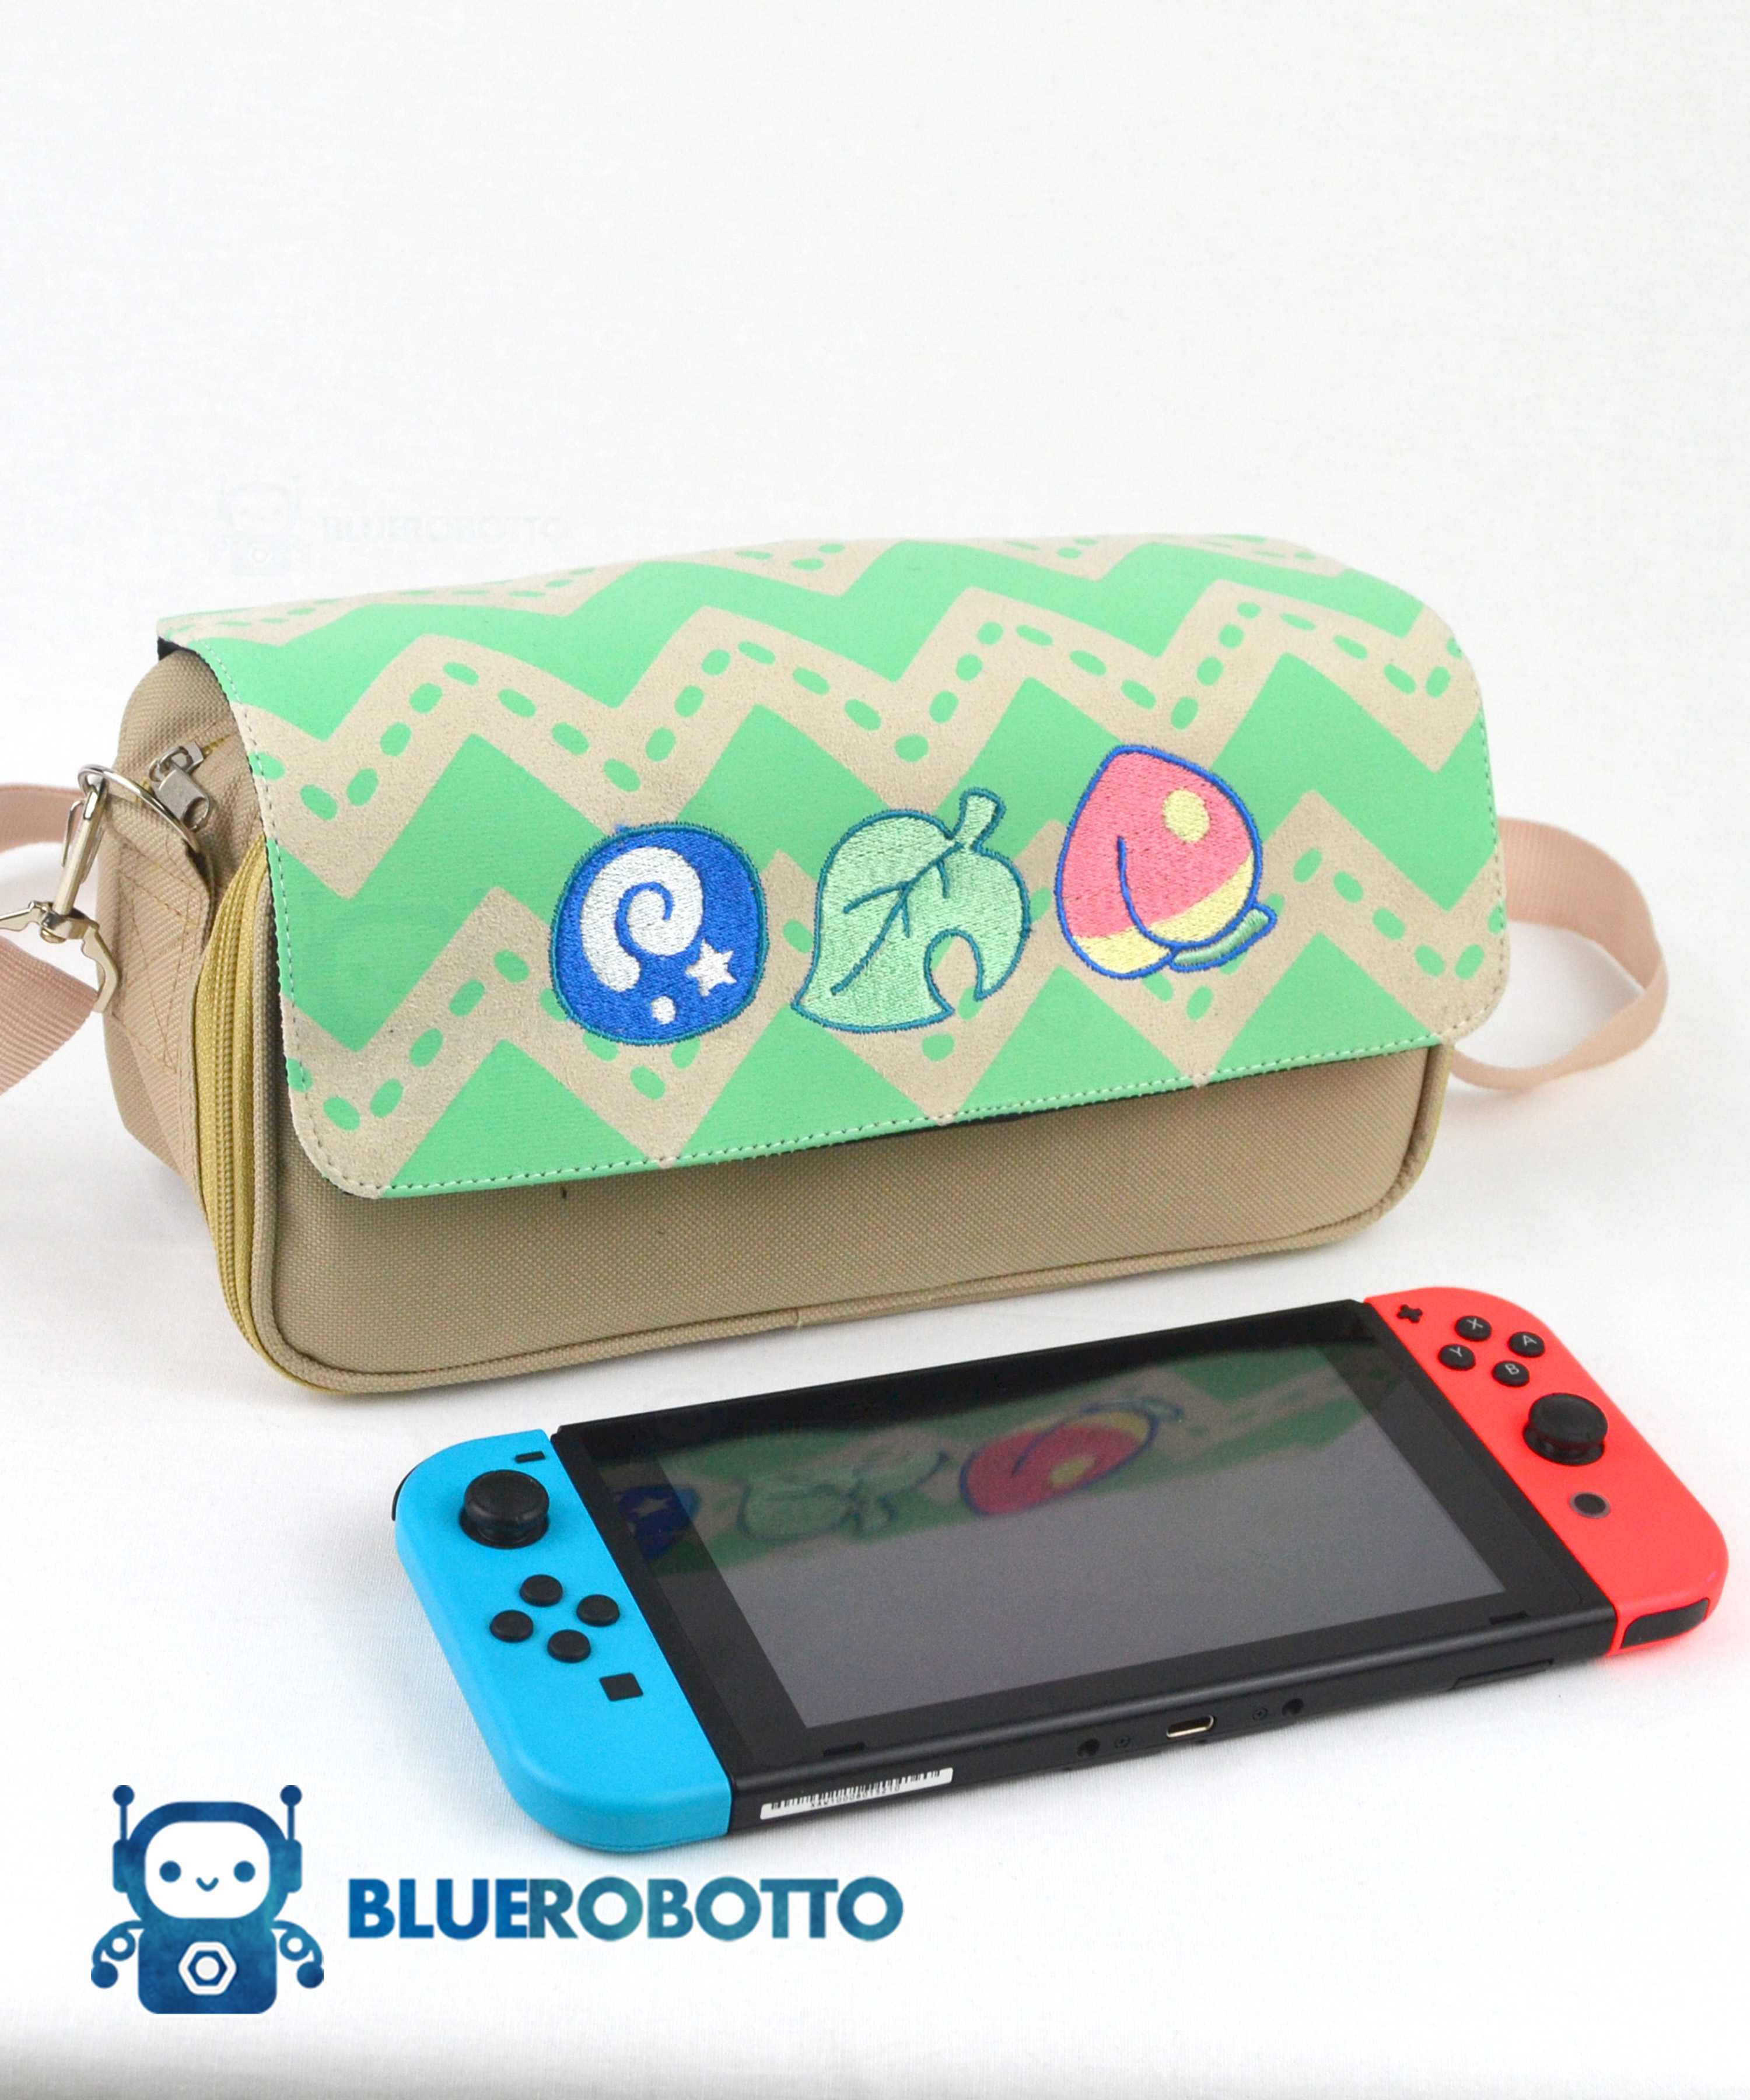 animal crossing accessories switch